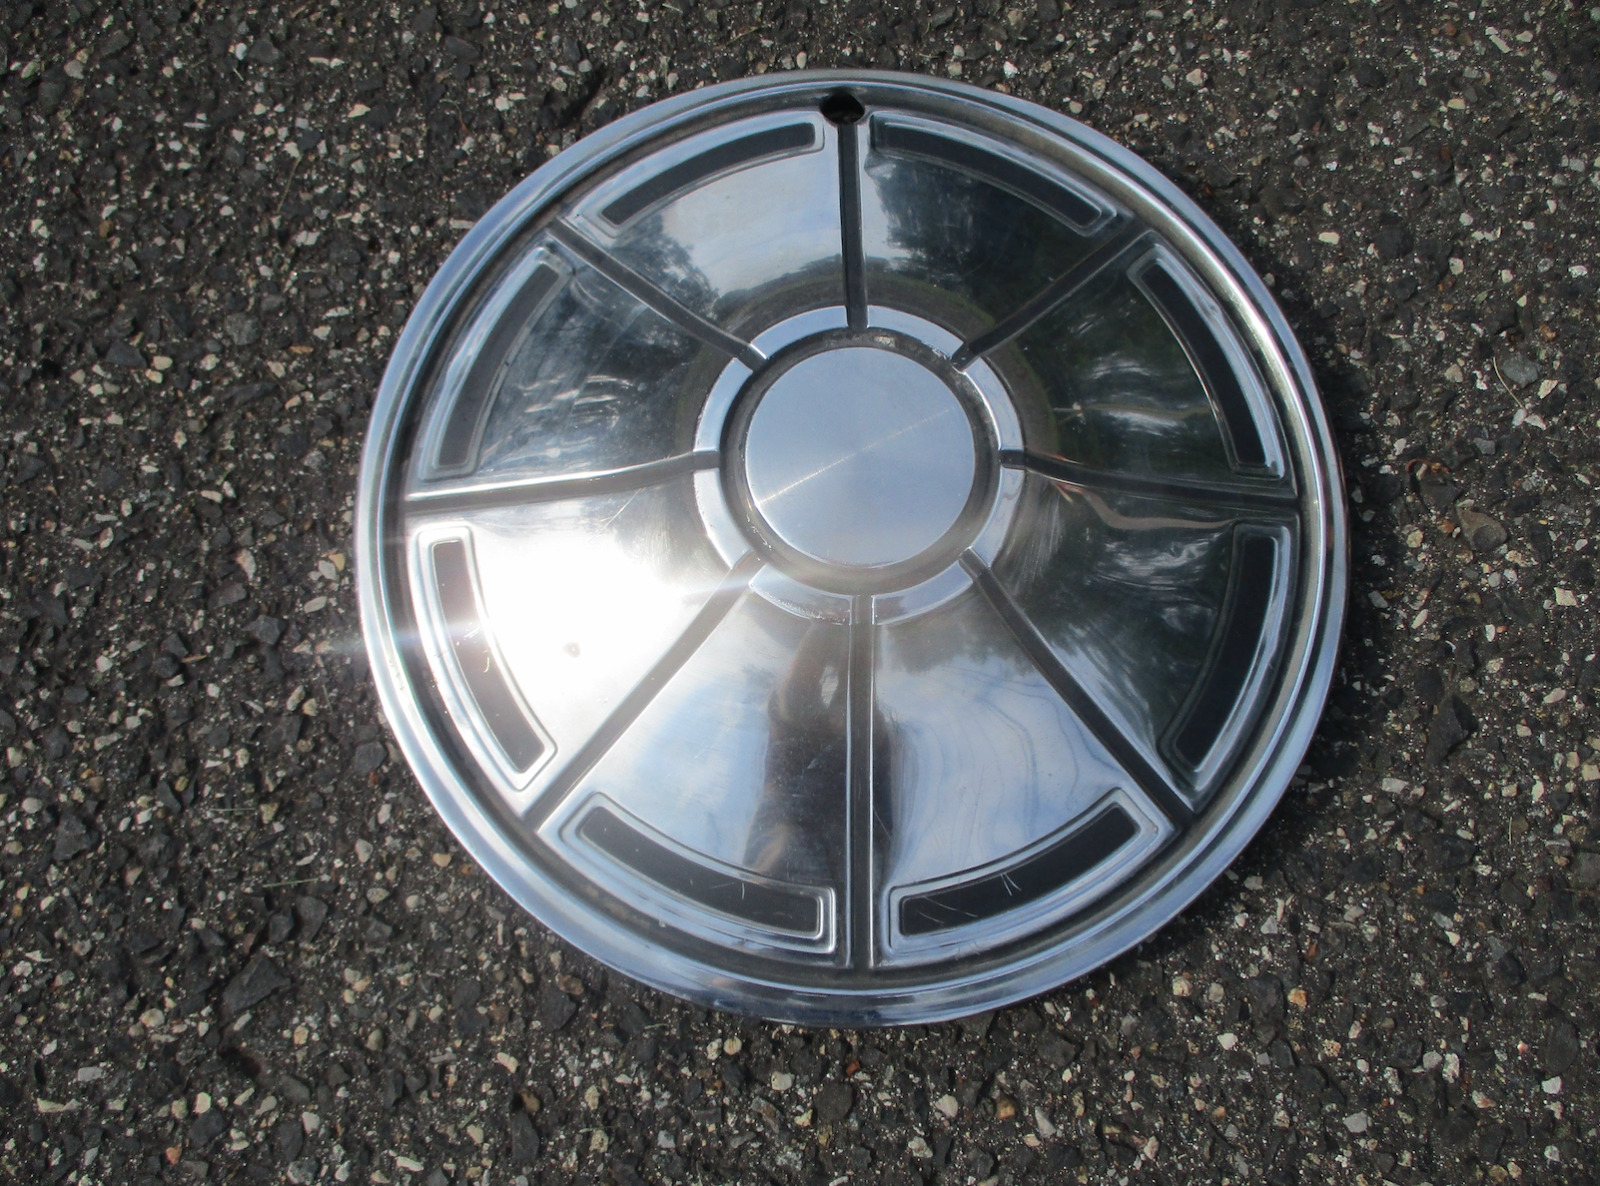 One factory 1973 to 1976 Plymouth Duster Valiant 14 inch hubcap wheel cover